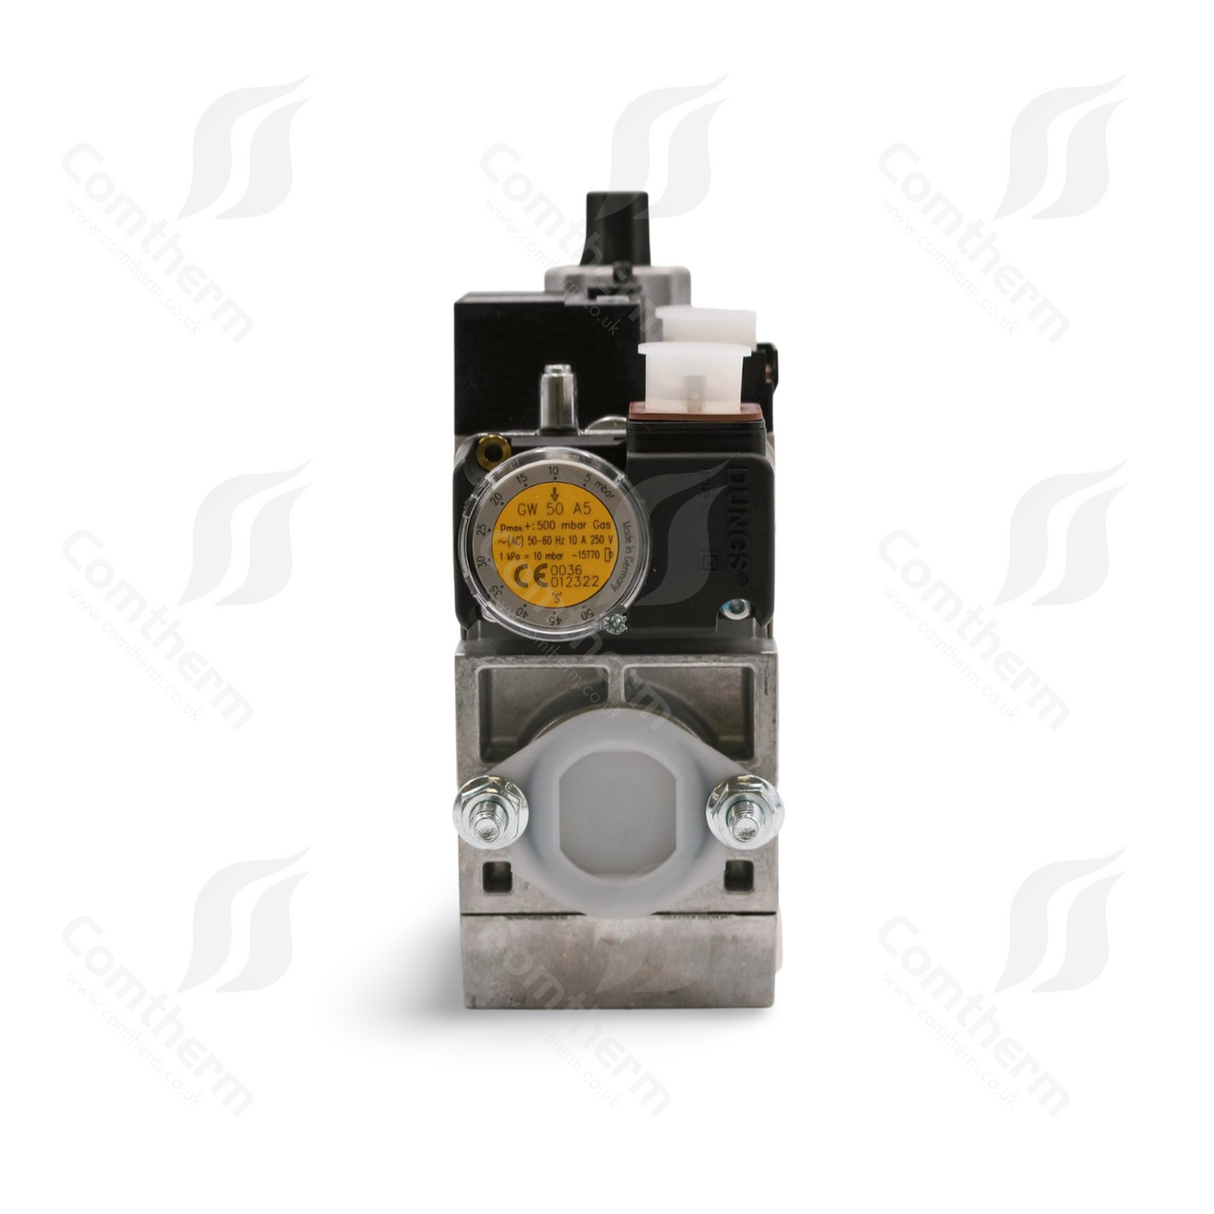 Dungs MB-DLE 410 B01 S20 + GW50A5 Multibloc Gas Valve - 230v